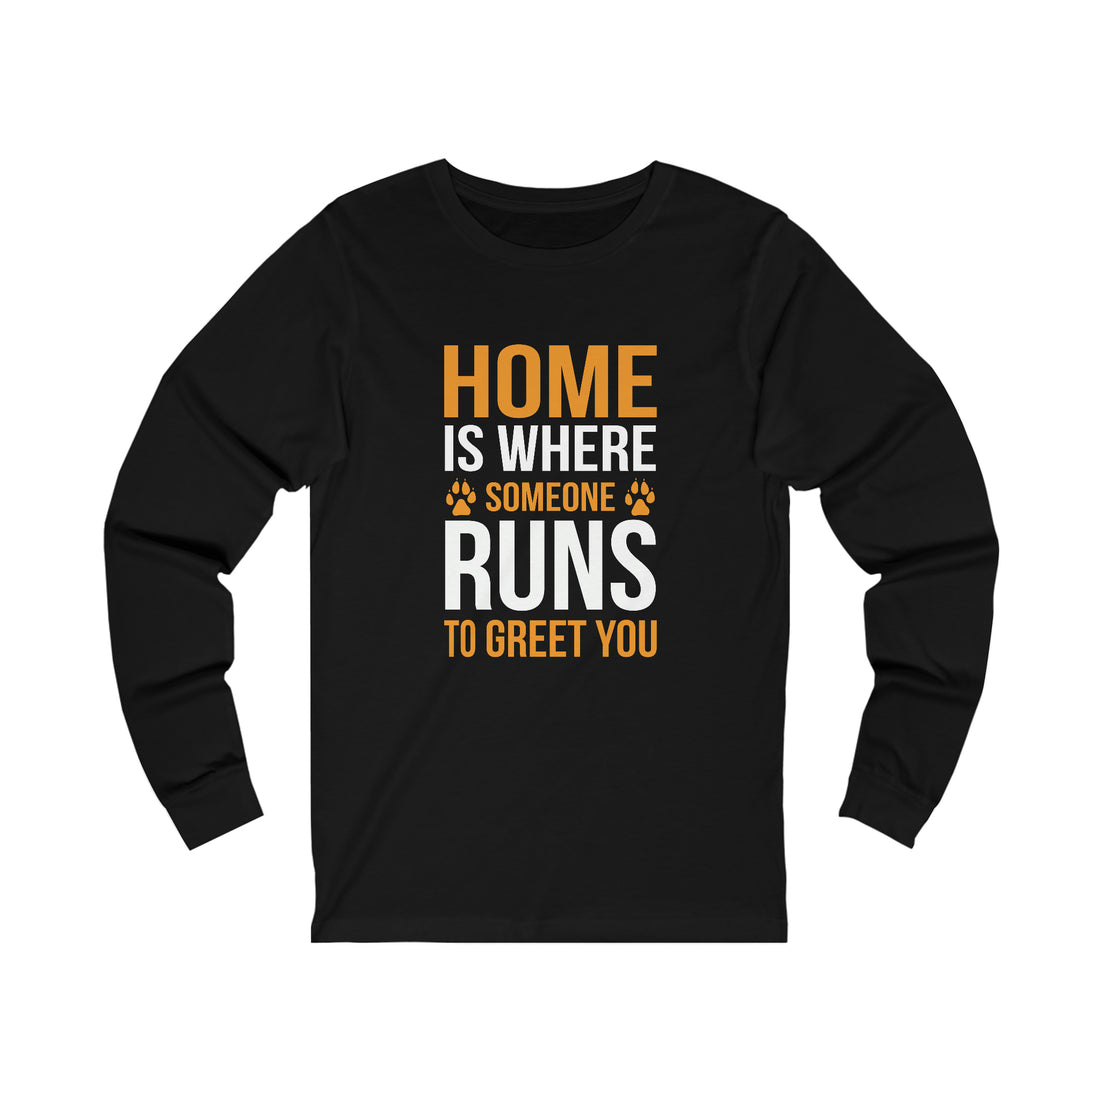 Home Is Where Someone Runs To Greet You - Unisex Jersey Long Sleeve Tee